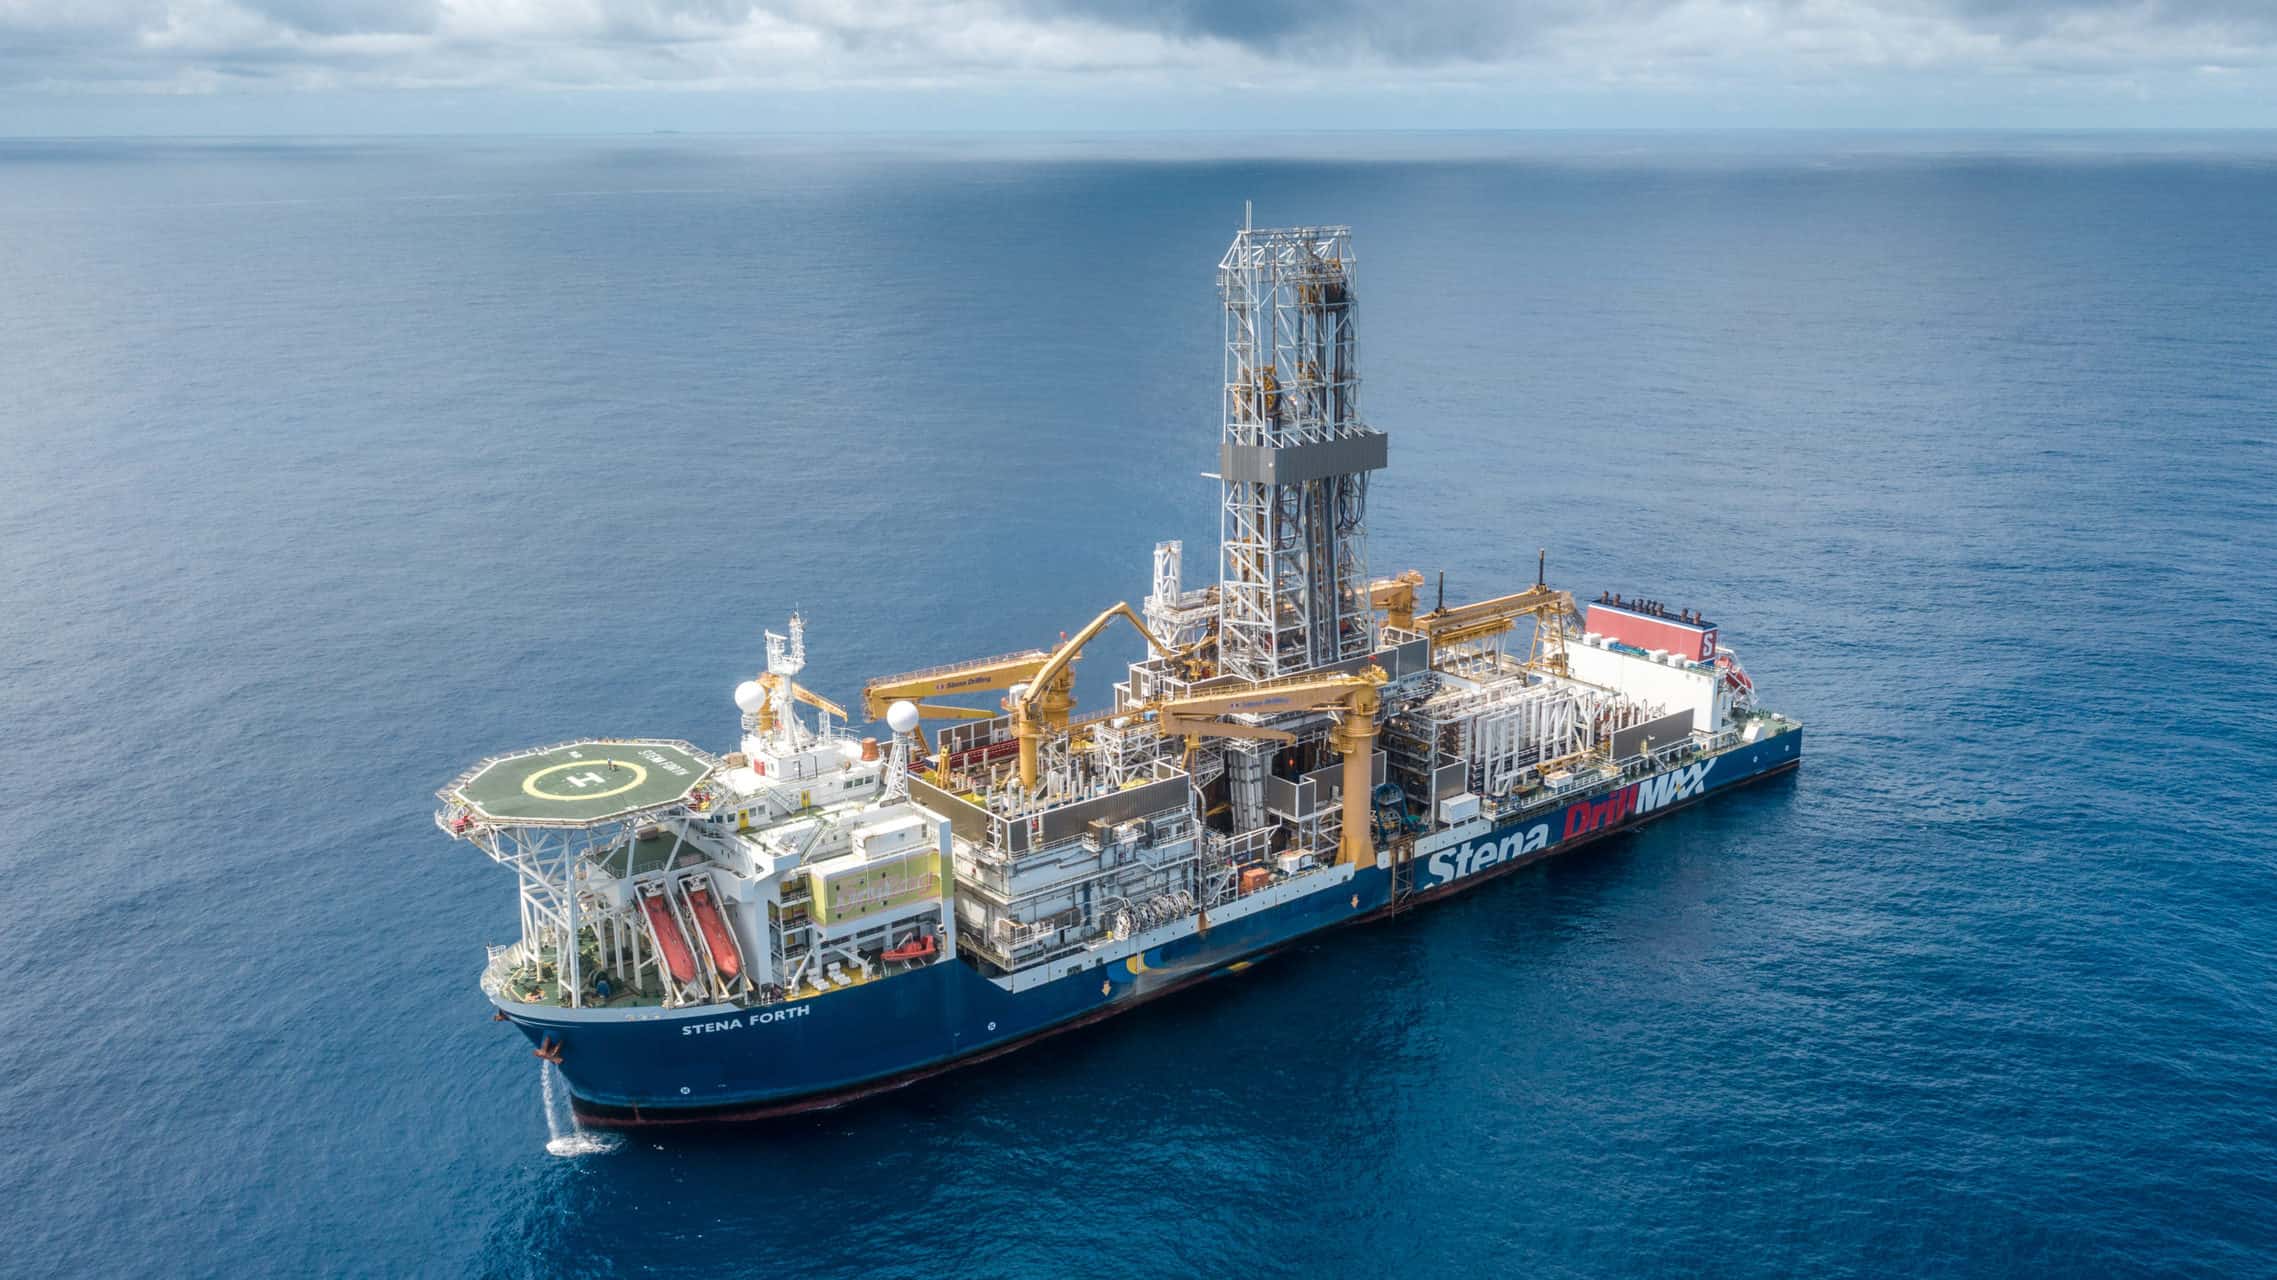 The Stena Forth drillship drill the Suriname well for Tullow